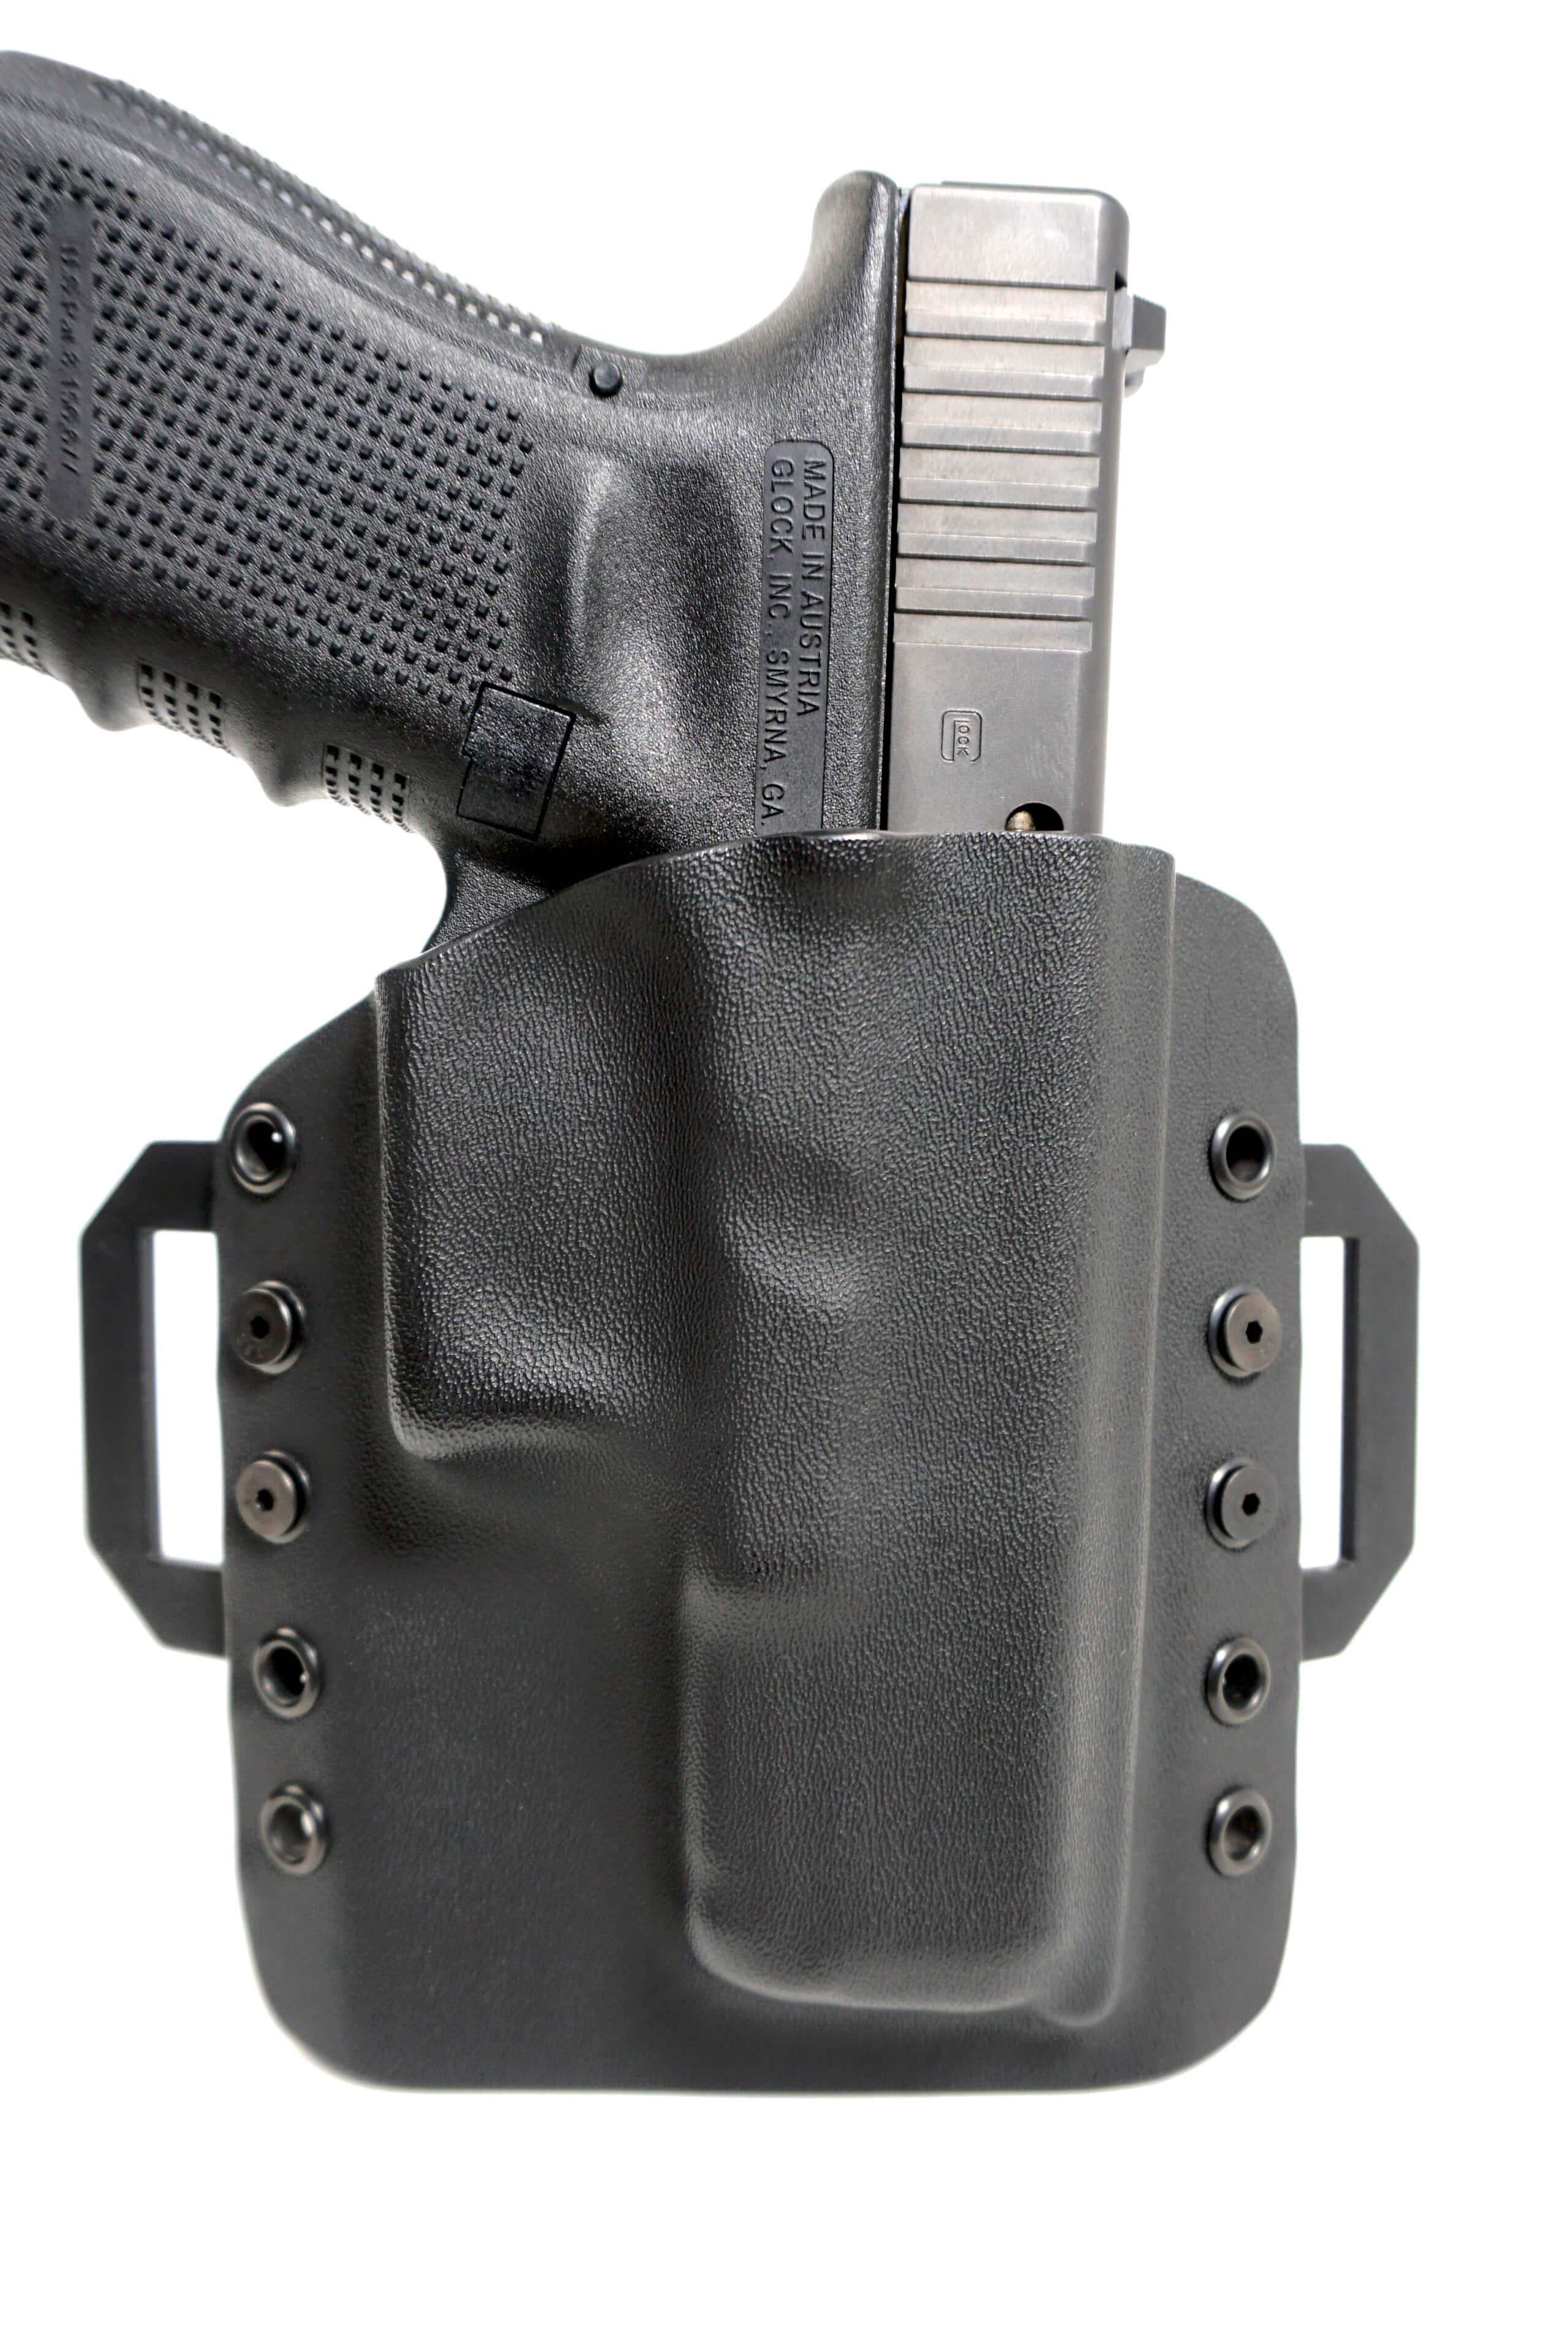 Elite Force Holsters IWB Holster for XD 4 Inch 9mm/40cal/357cal 